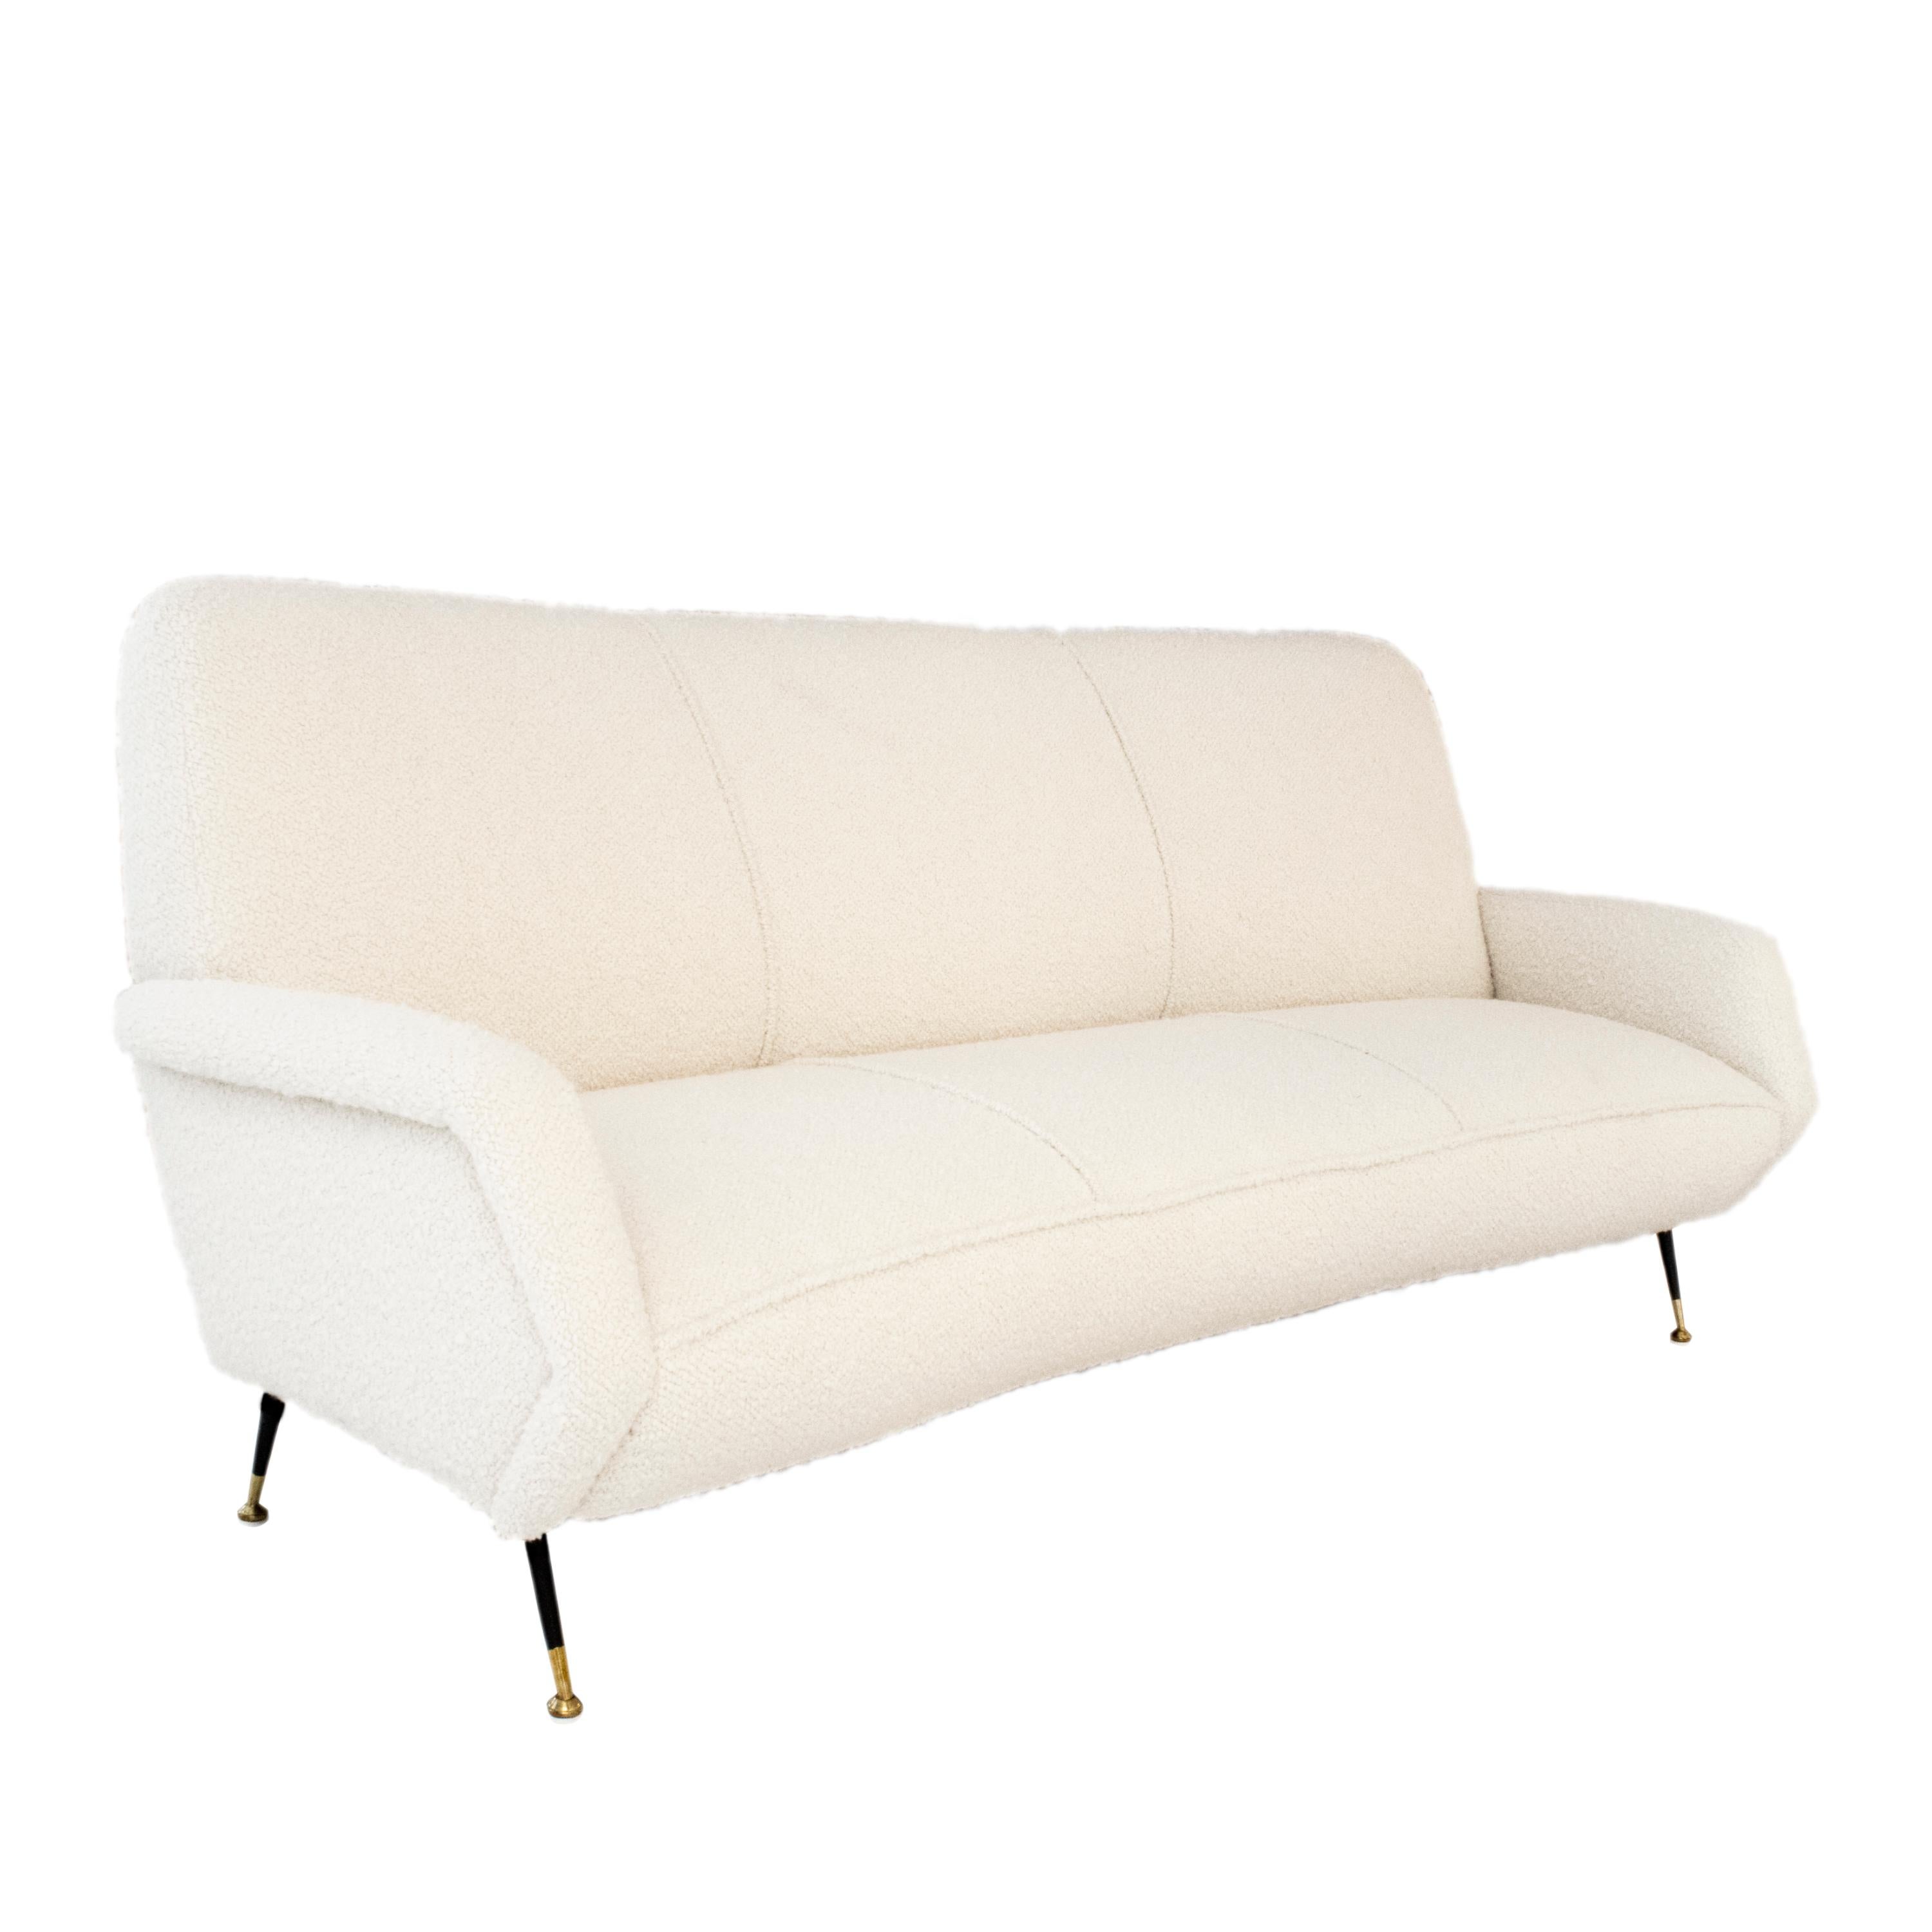 The white bouclé sofa is composed of a wooden structure and five metallic legs with brass details, upholstered in a white boucle. Made in Italy in the 1950's.

The white bouclé upholstery adds a touch of sophistication to the design, enhancing the